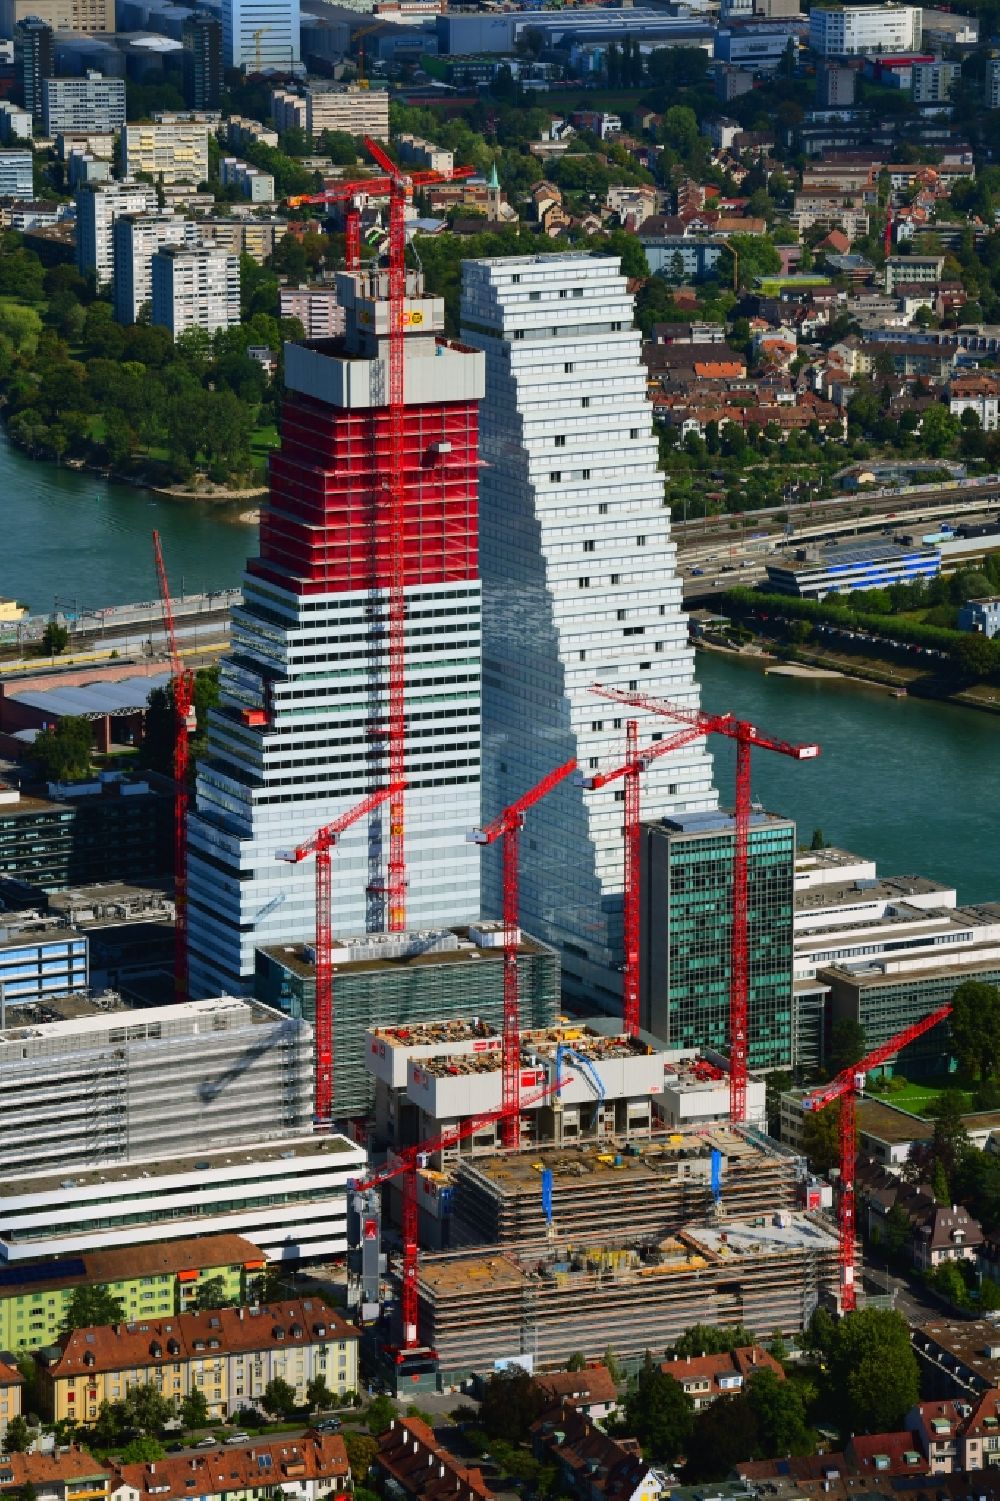 Basel from above - Extension construction sites on the premises of the pharmaceutical company Roche with the cityscape-defining high-rise building in Basel in Switzerland. Construction works for the second tower are visible